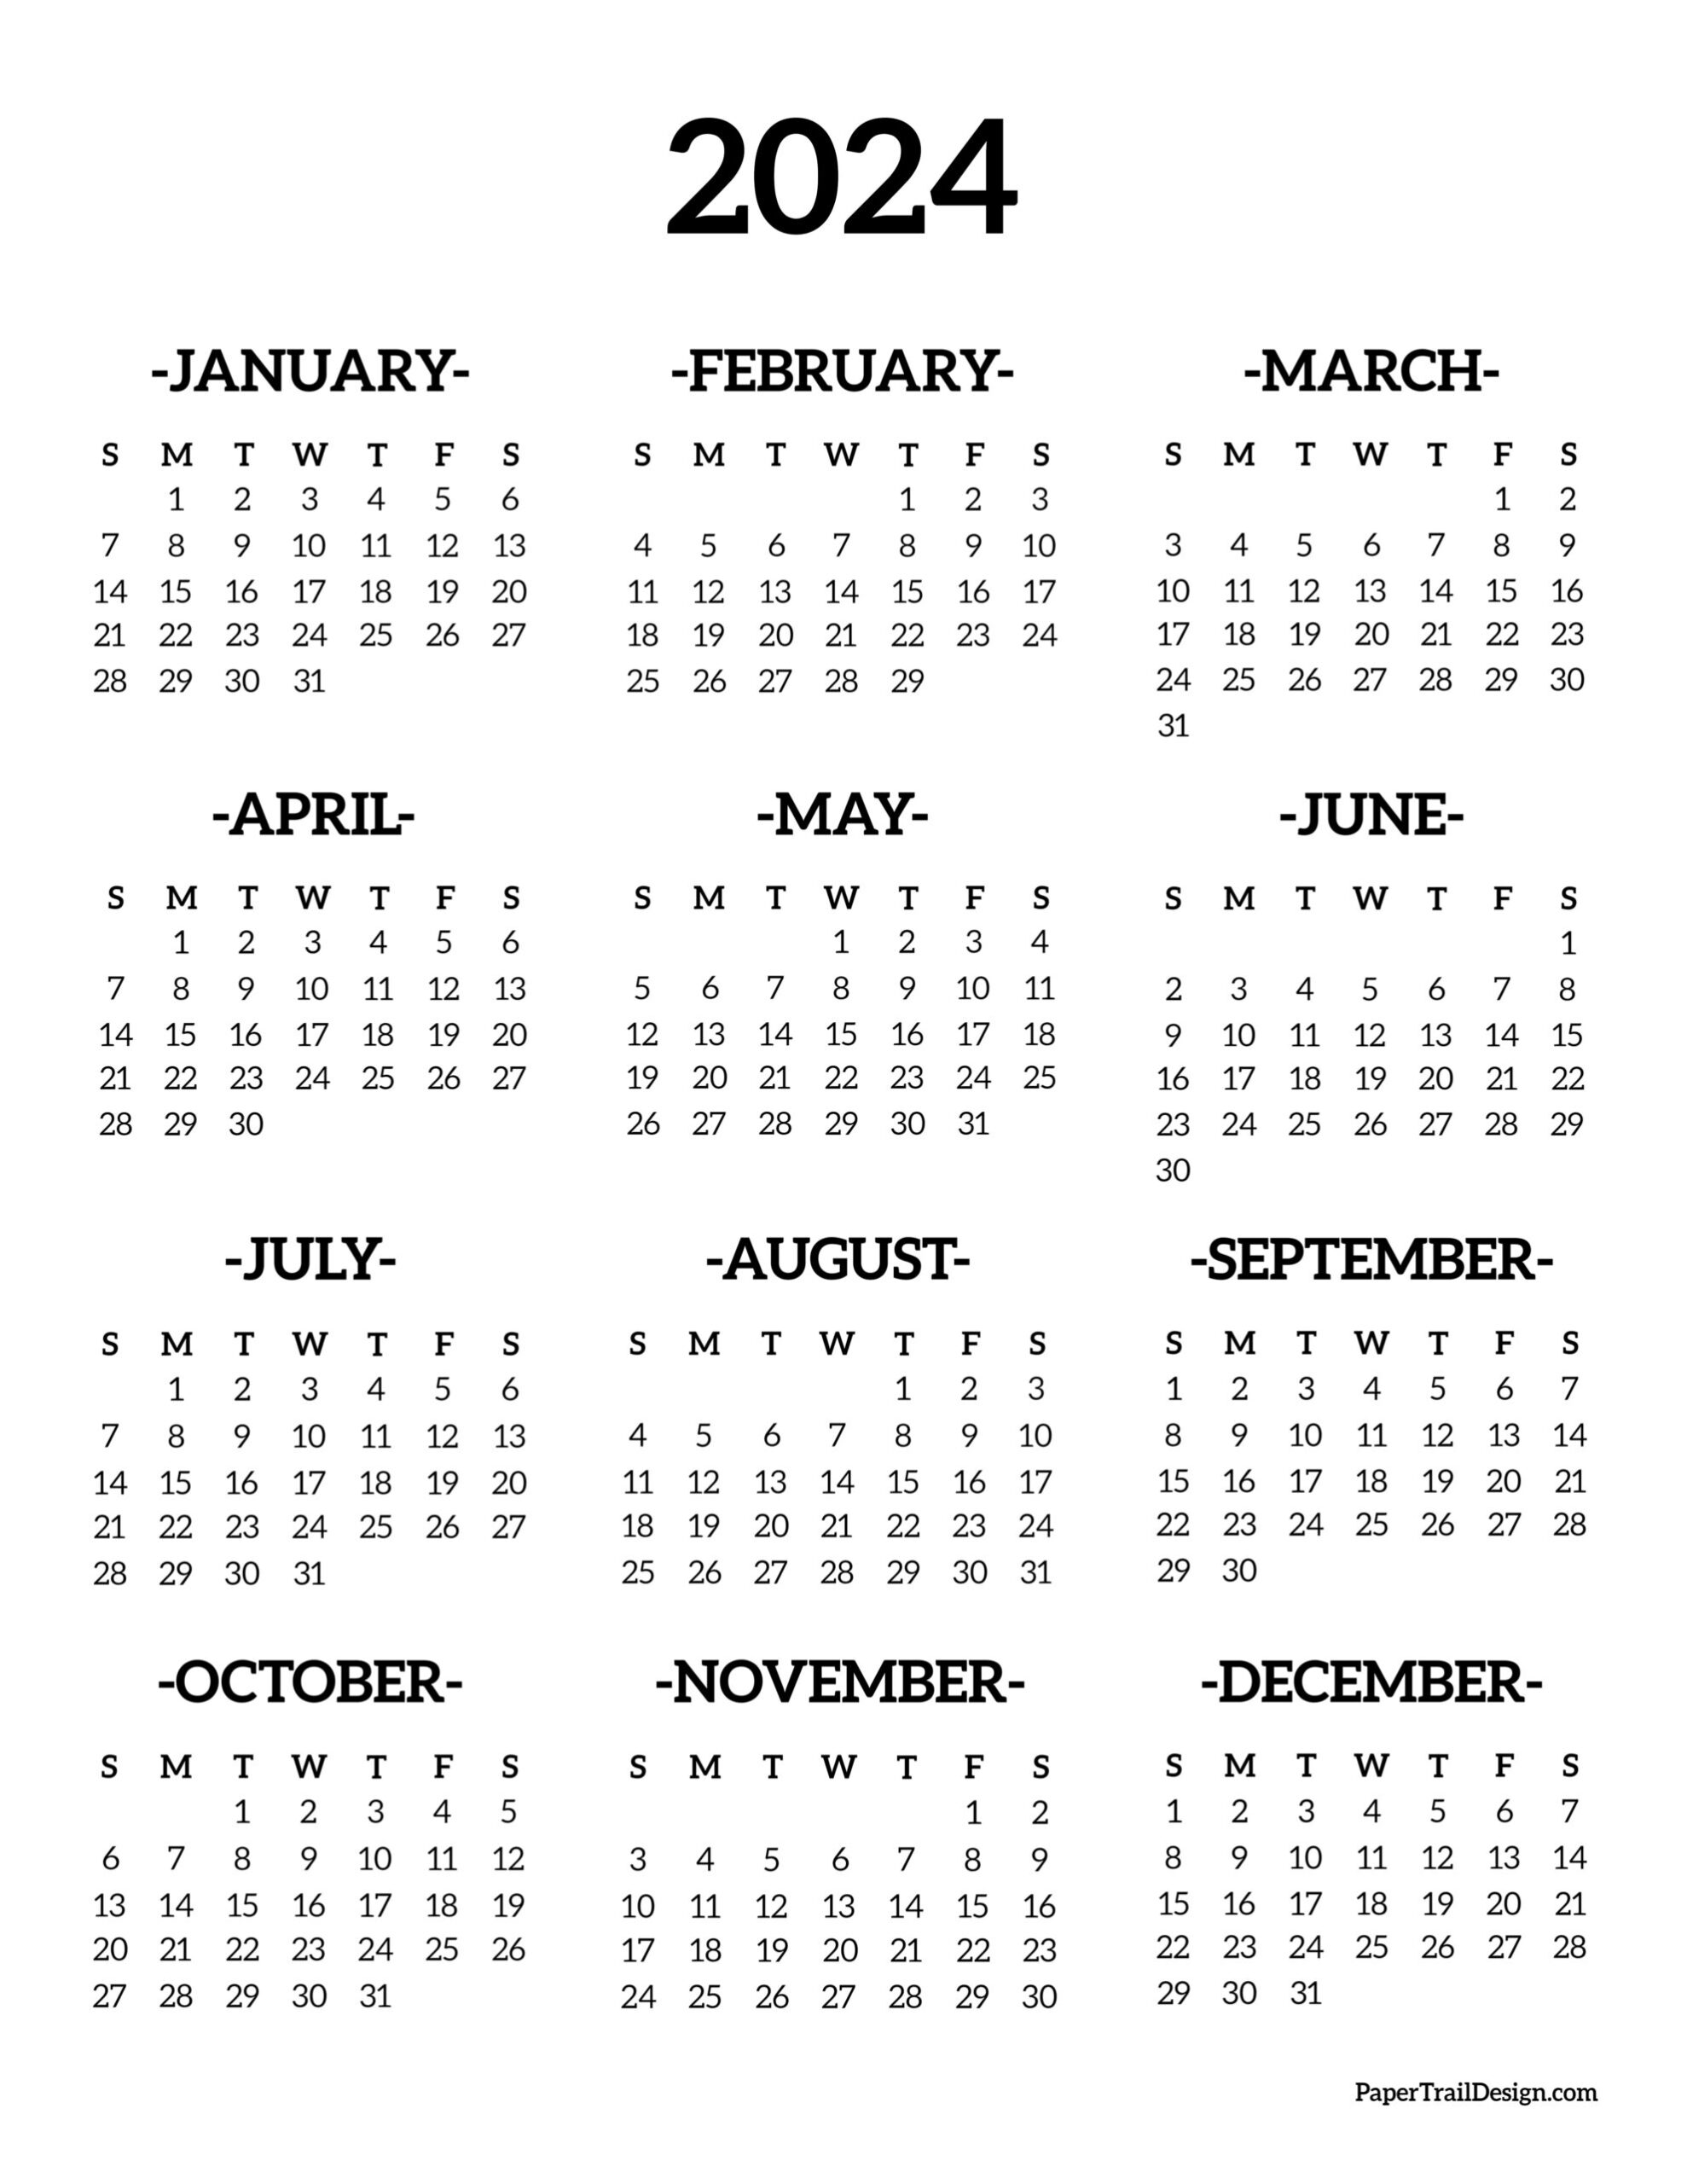 Calendar 2024 Printable One Page - Paper Trail Design for Black And White Printable Calendar 2024